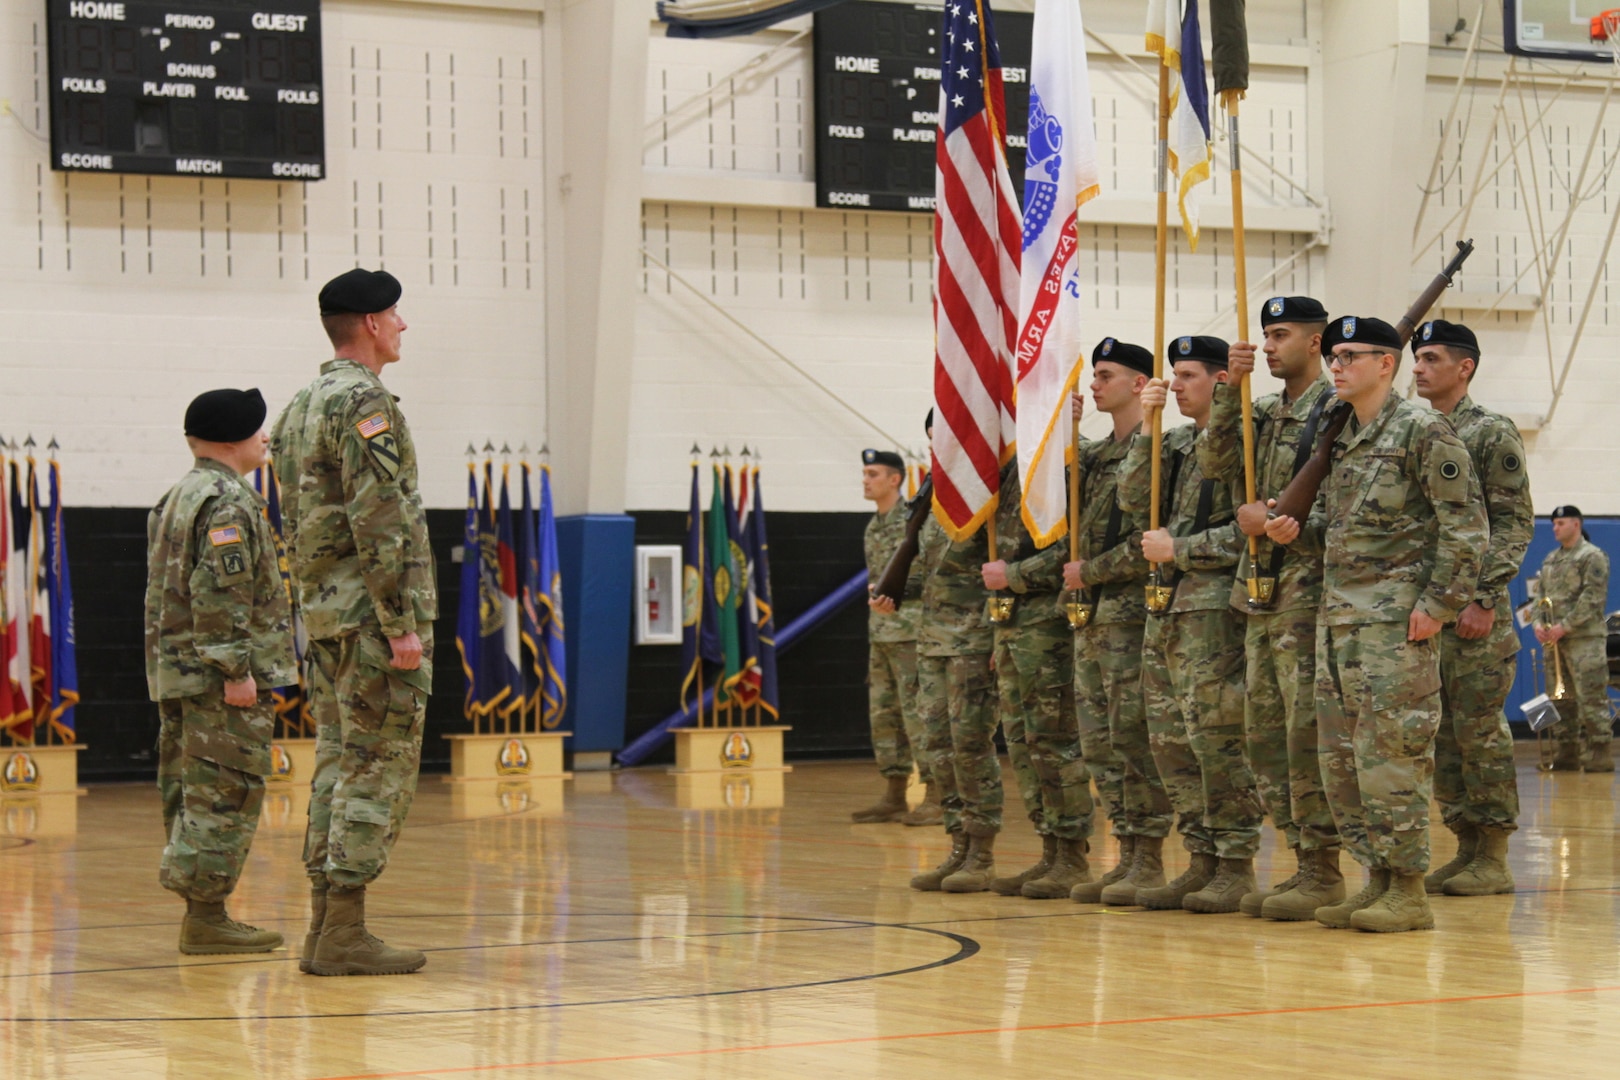 America’s First Corps Commanding General Lt. Gen. Gary Volesky and Lt. Col. Derek Bothern, battalion commander of the newly activated Intelligence, Information, Cyber, Electronic Warfare and Space Detachment prepare to receive the unit flag for I2CEWS during a ceremony Jan. 11, 2019, at Joint Base Lewis McChord, Washington. The ceremony marked the launch of the first-ever Intelligence, Information, Cyber, Electronic Warfare and Space Detachment in the U.S. Army. I2CEWS was designed to integrate cyber warfare, electronic warfare and space capabilities. (U.S. Army photo by Pvt. Caleb Minor)